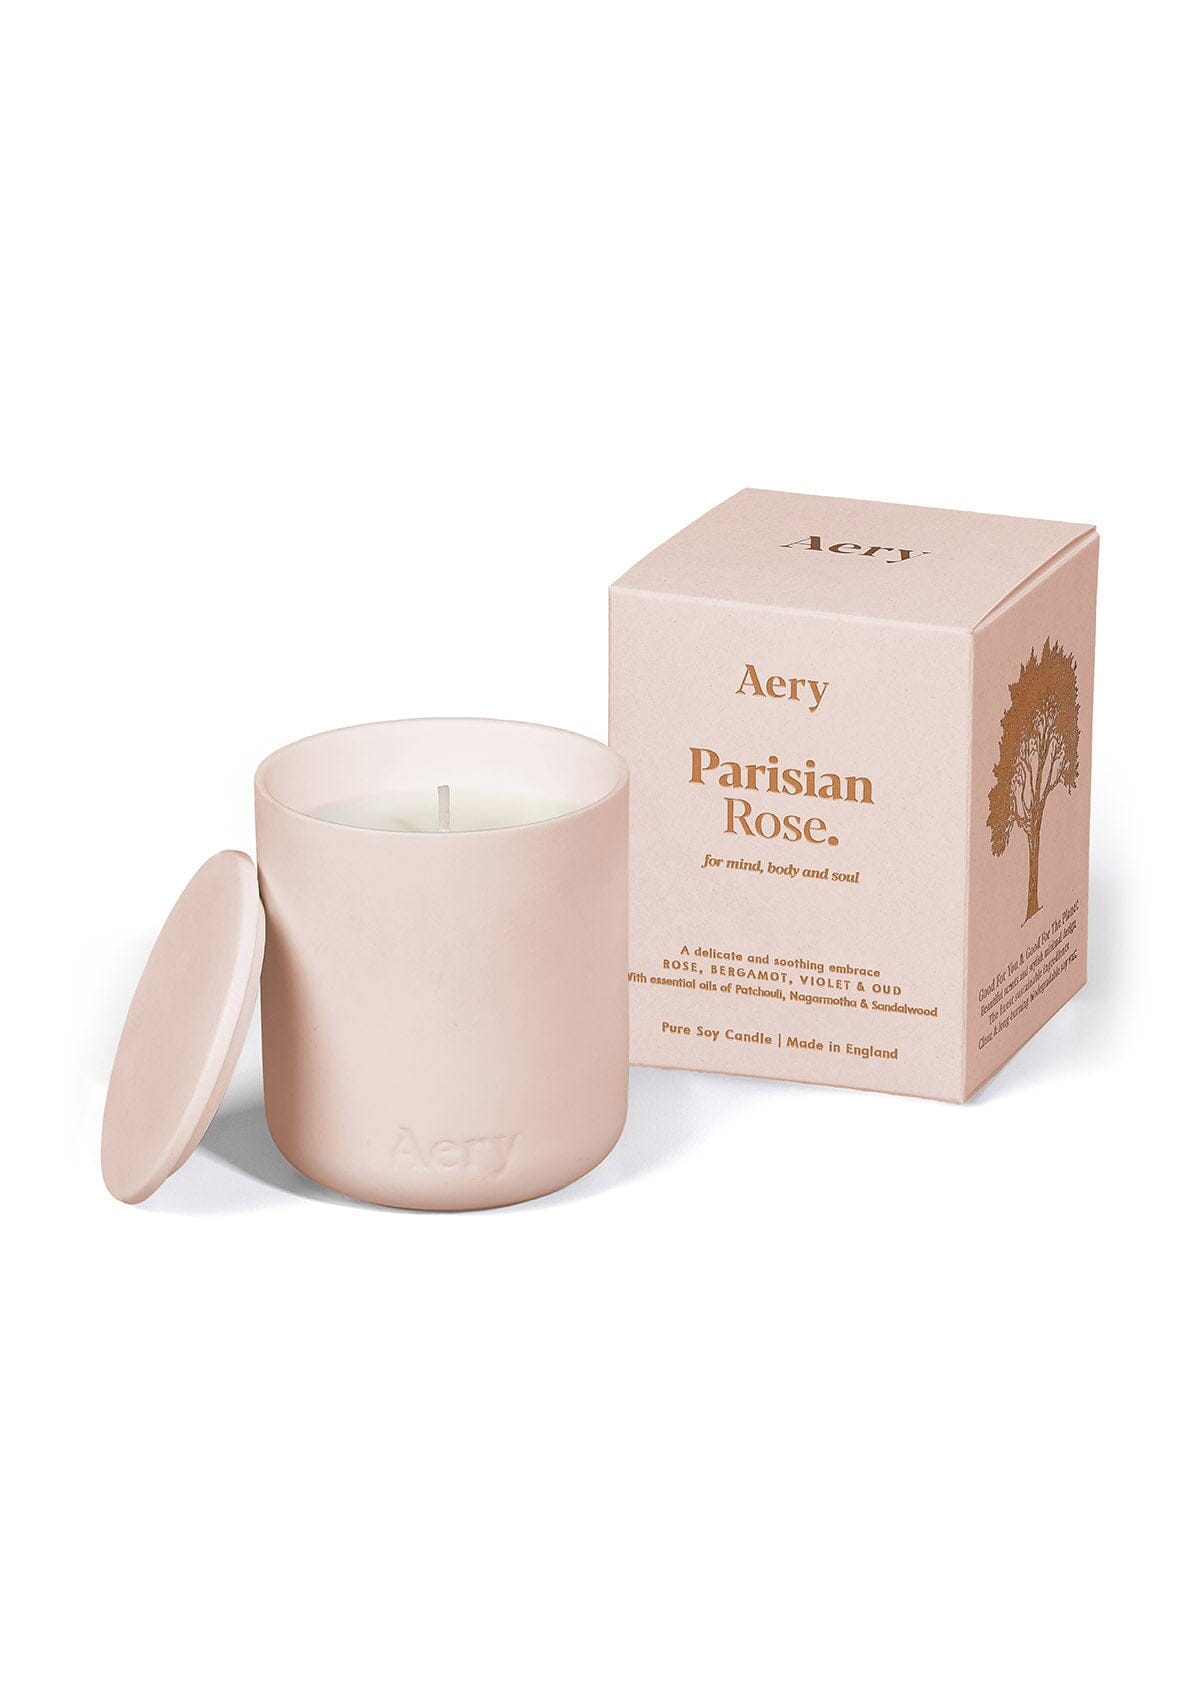 Pale pink ceramic Parisian Rose scented candle displayed next to product packaging by Aery on white background 